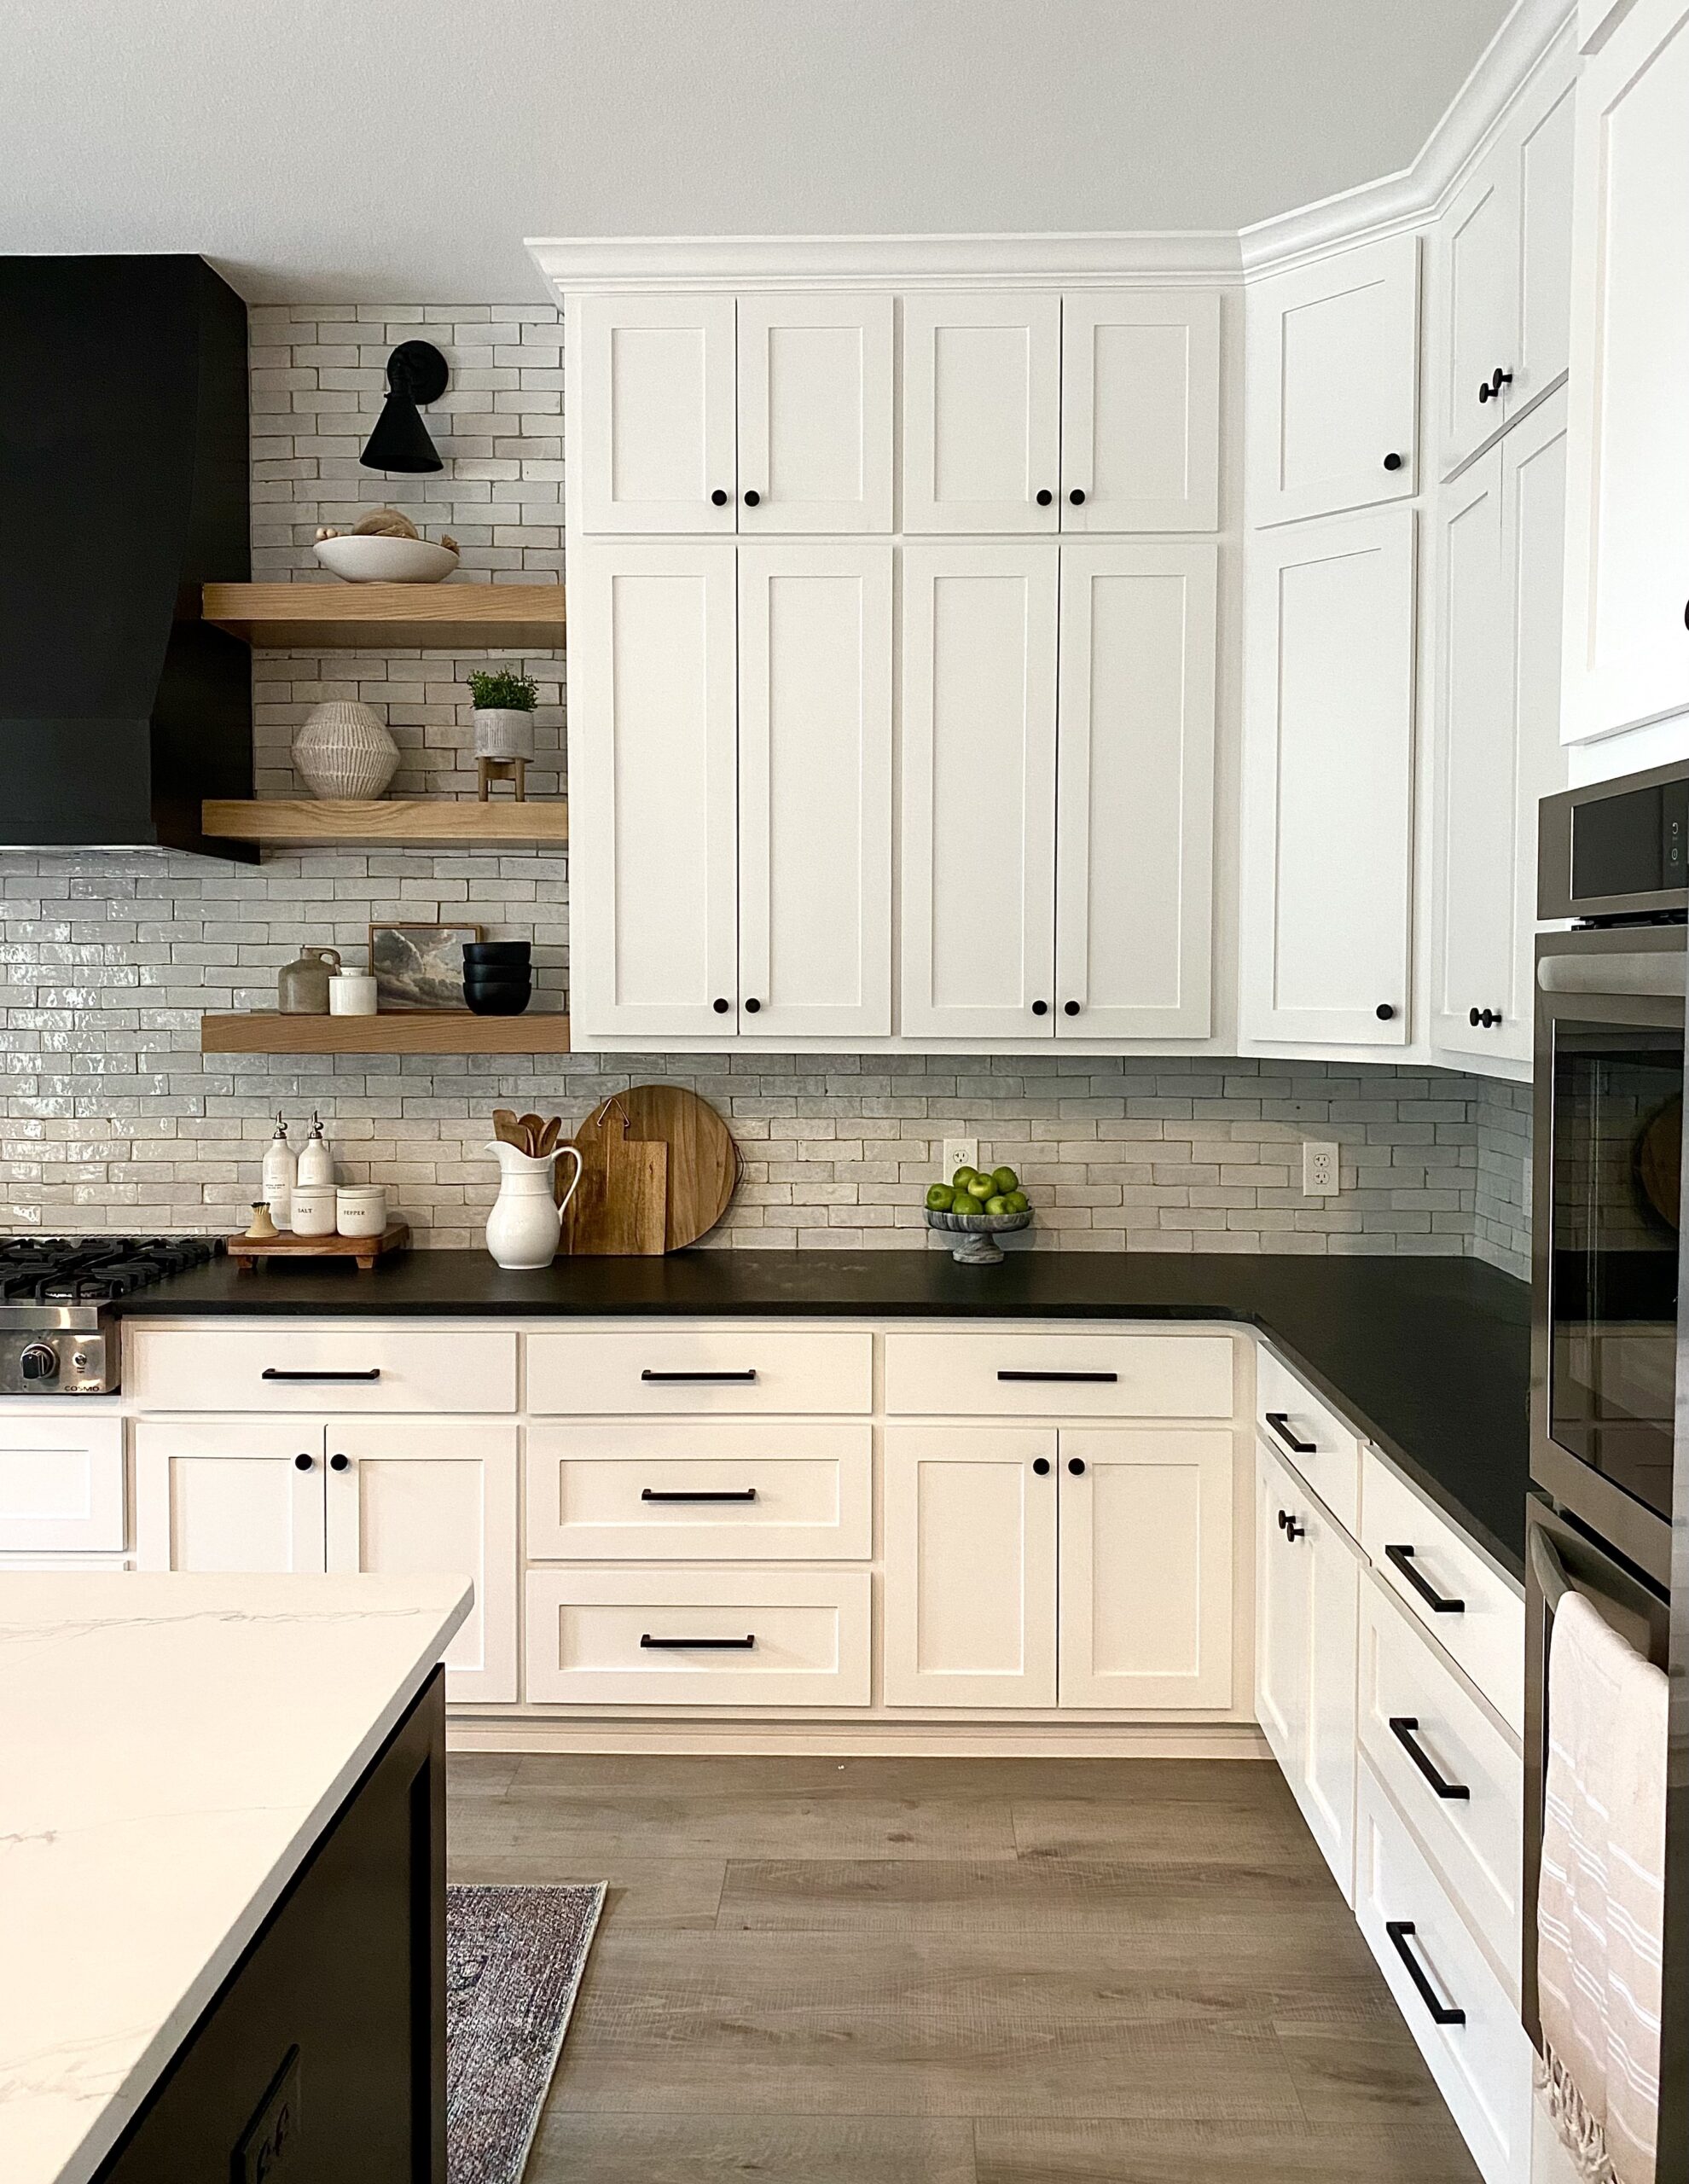 Kitchen Cabinet Hardware: Where to Put Knobs and Handles